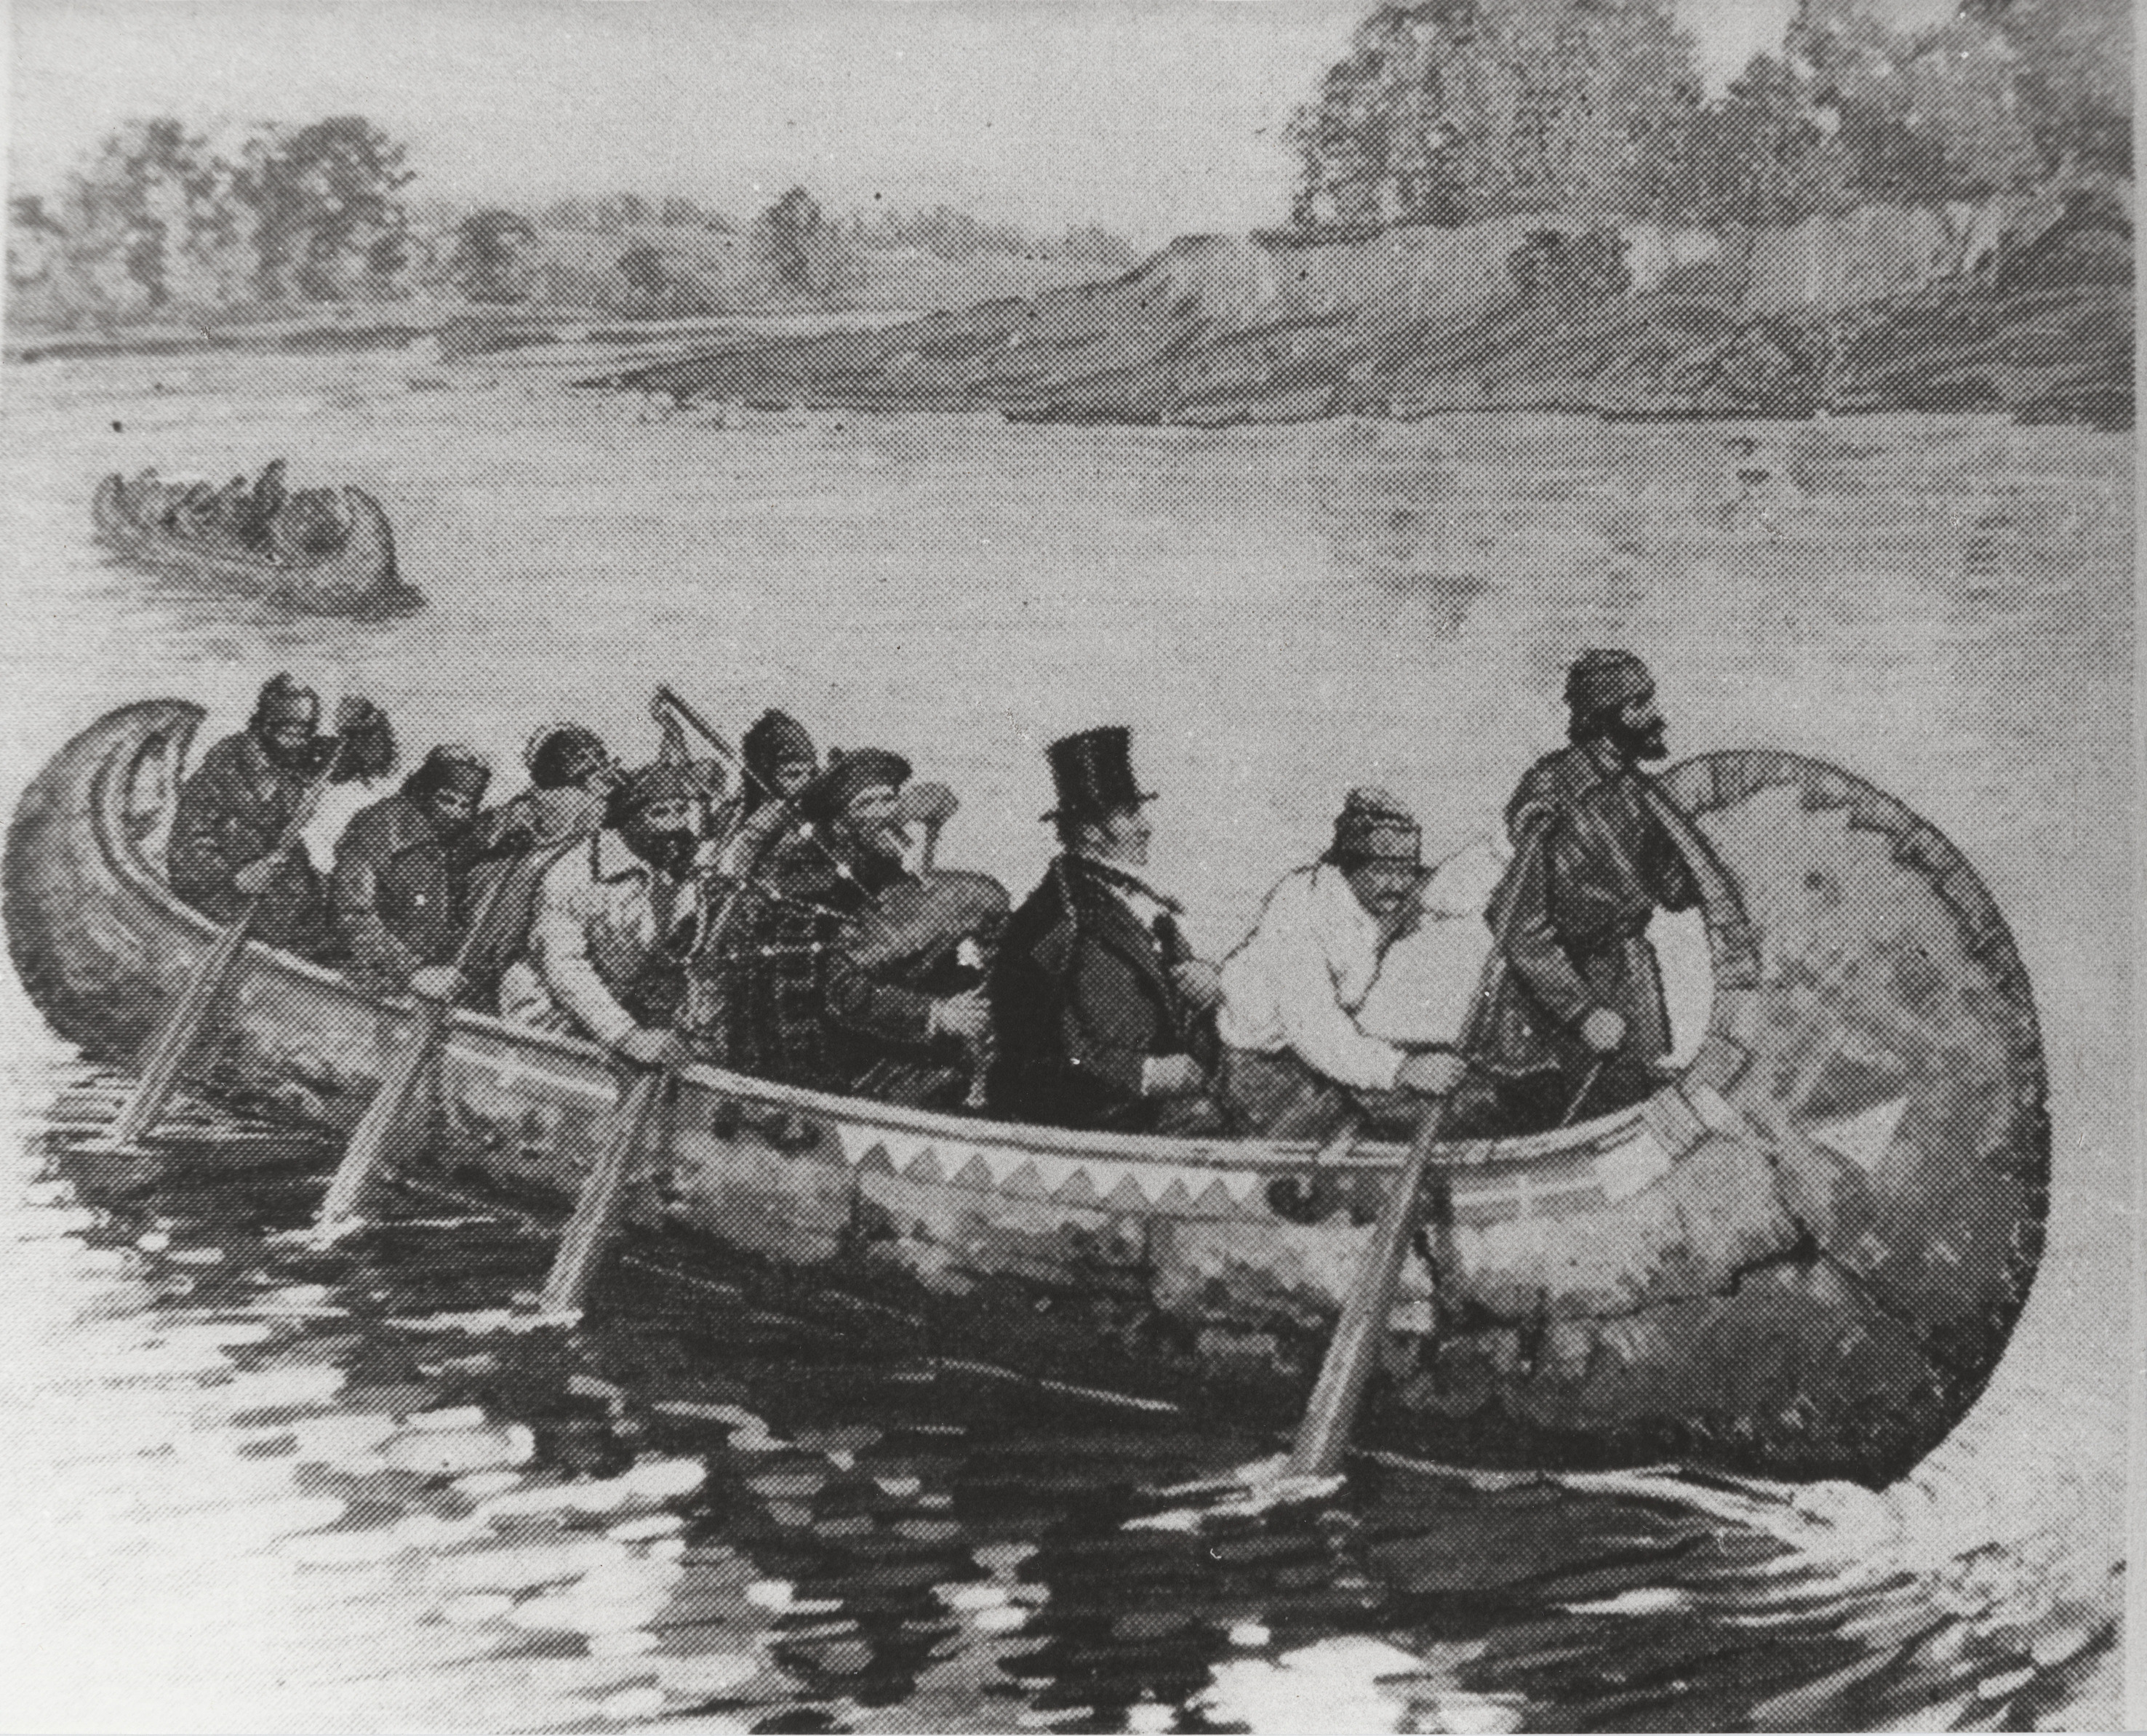 Black and white painting of nine men in a large canoe paddling on a river